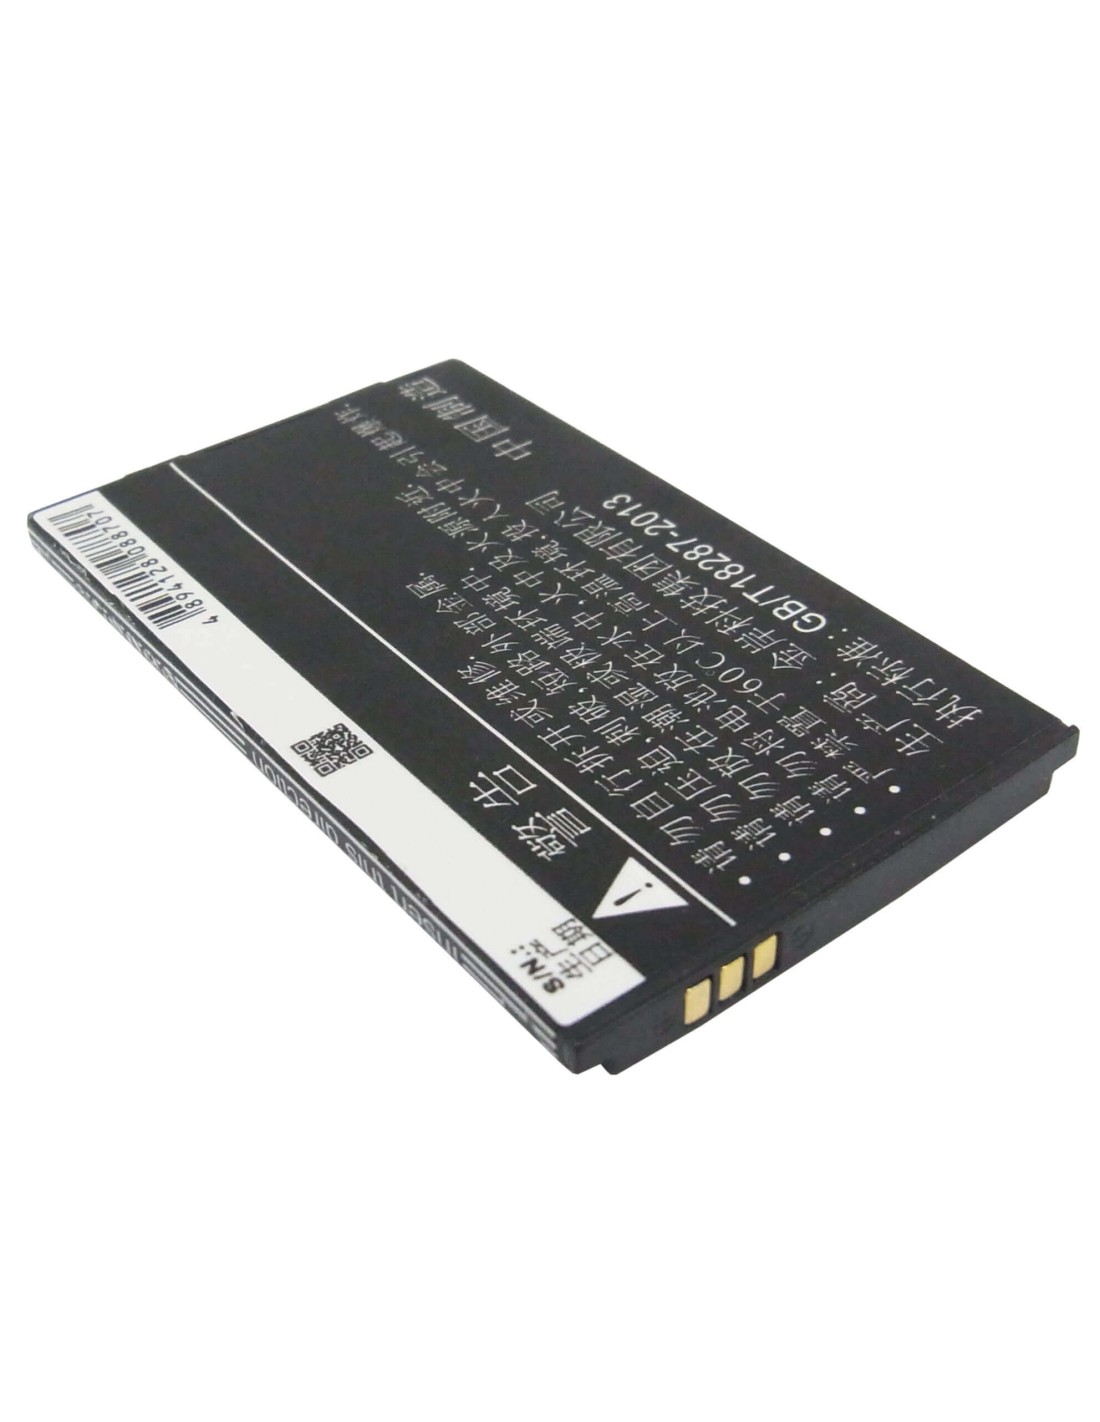 Battery for Coolpad F618, S180, E506 3.7V, 900mAh - 3.33Wh